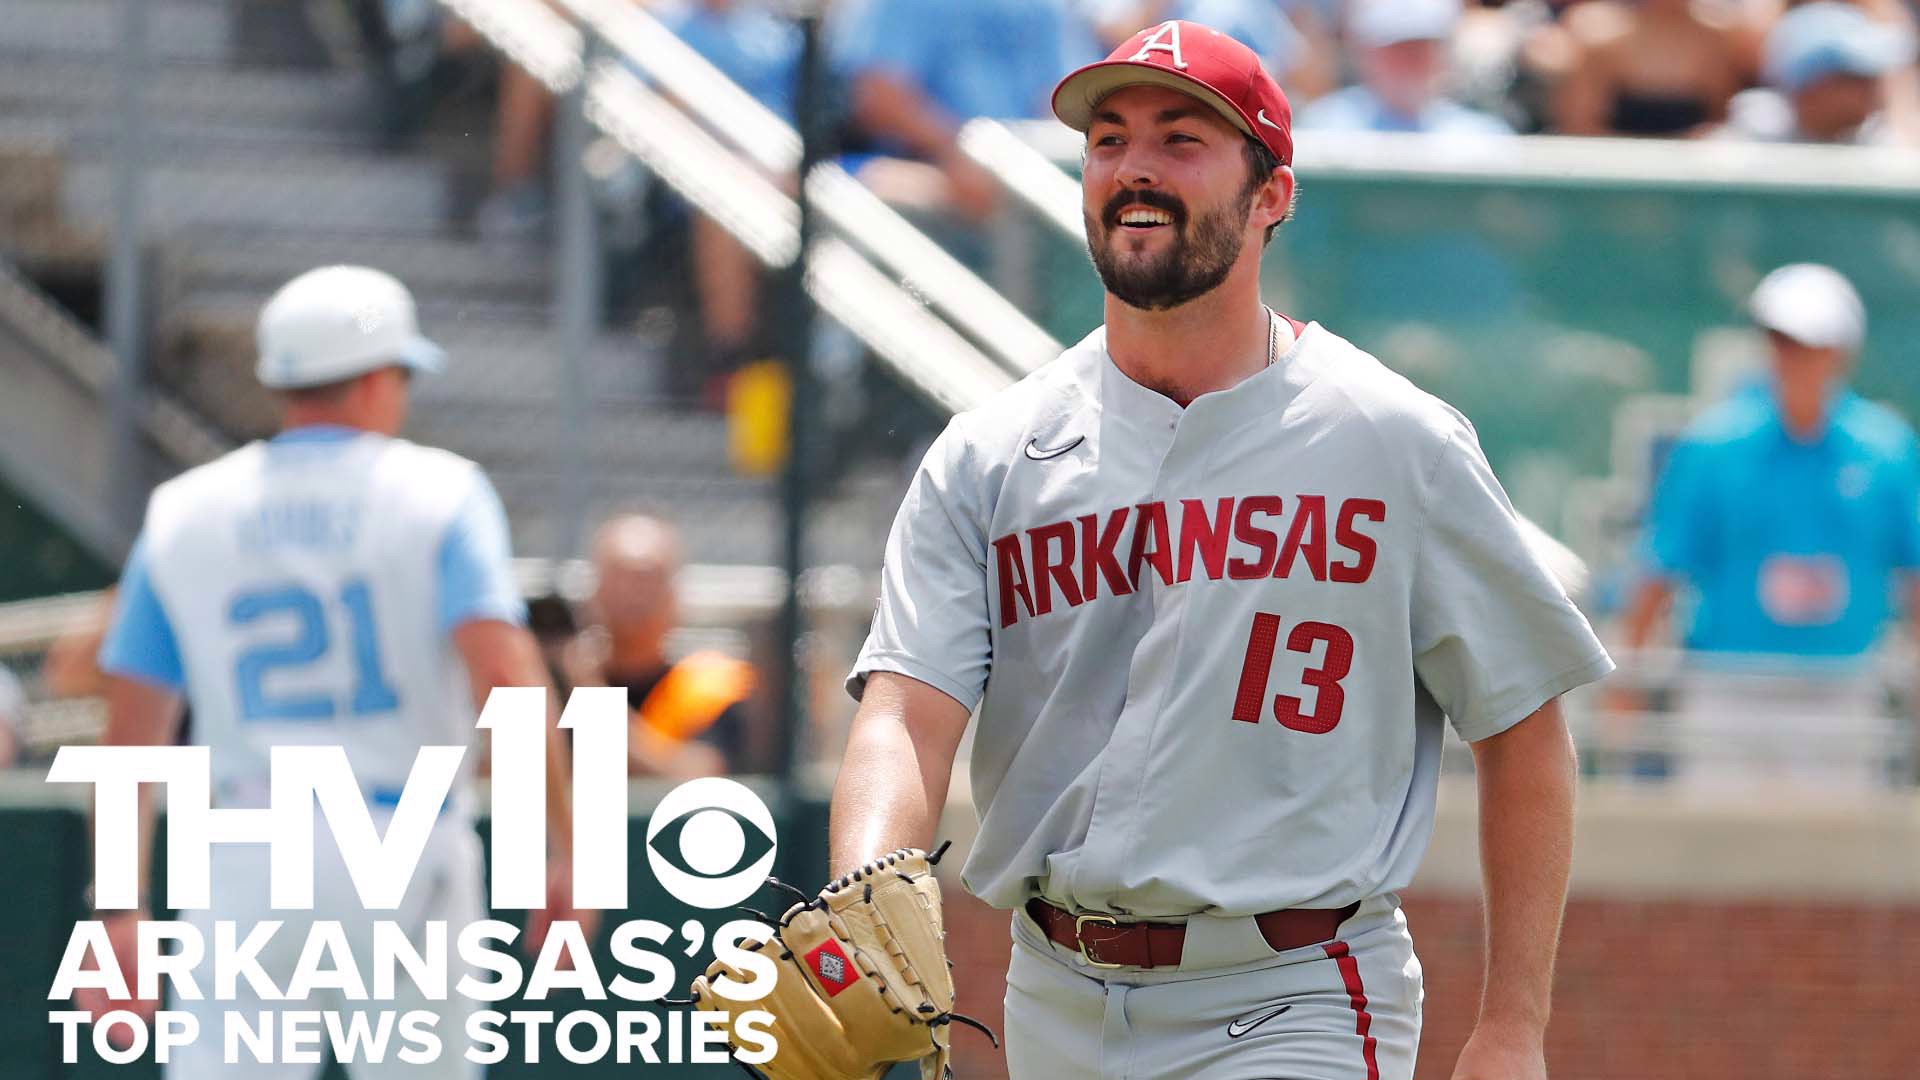 Sarah Horbacewicz delivers the latest news for June 11, 2022 including the Hogs' win in the super regionals and nationwide March for Our Lives protests.